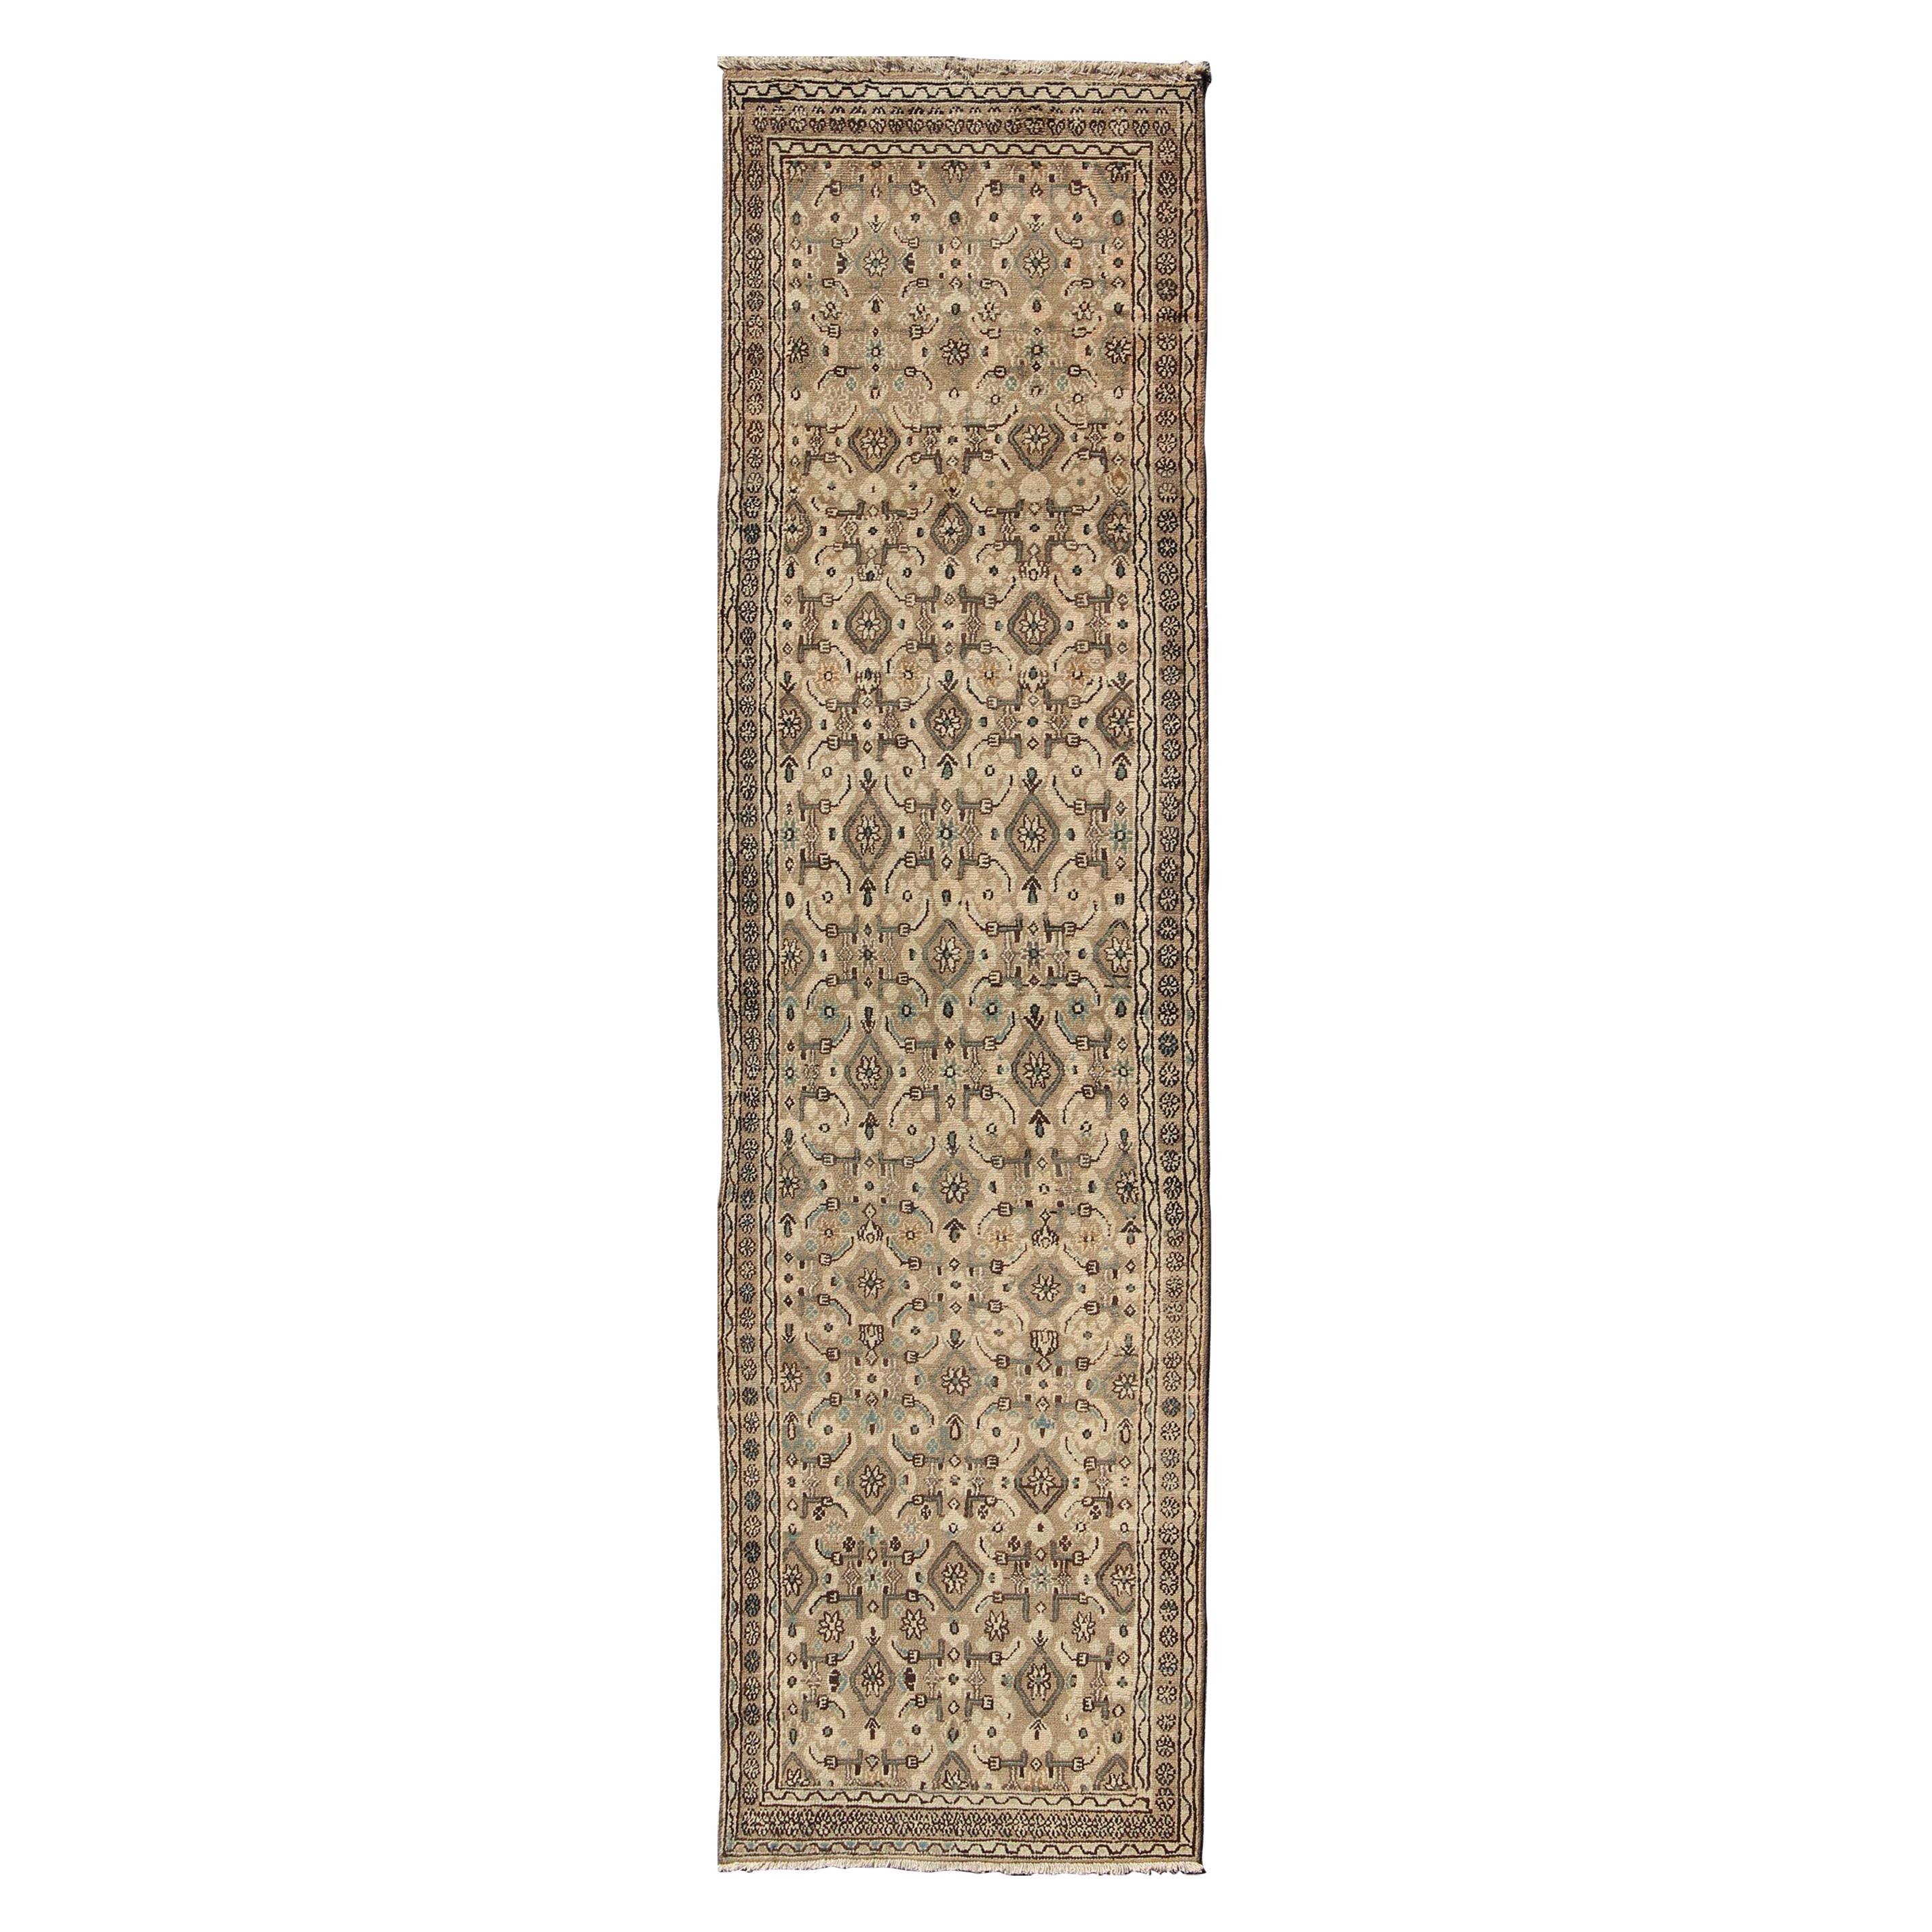 Antique Hamadan Runner in Neutral Warm Tones of Taupe, Brown, L. Brown